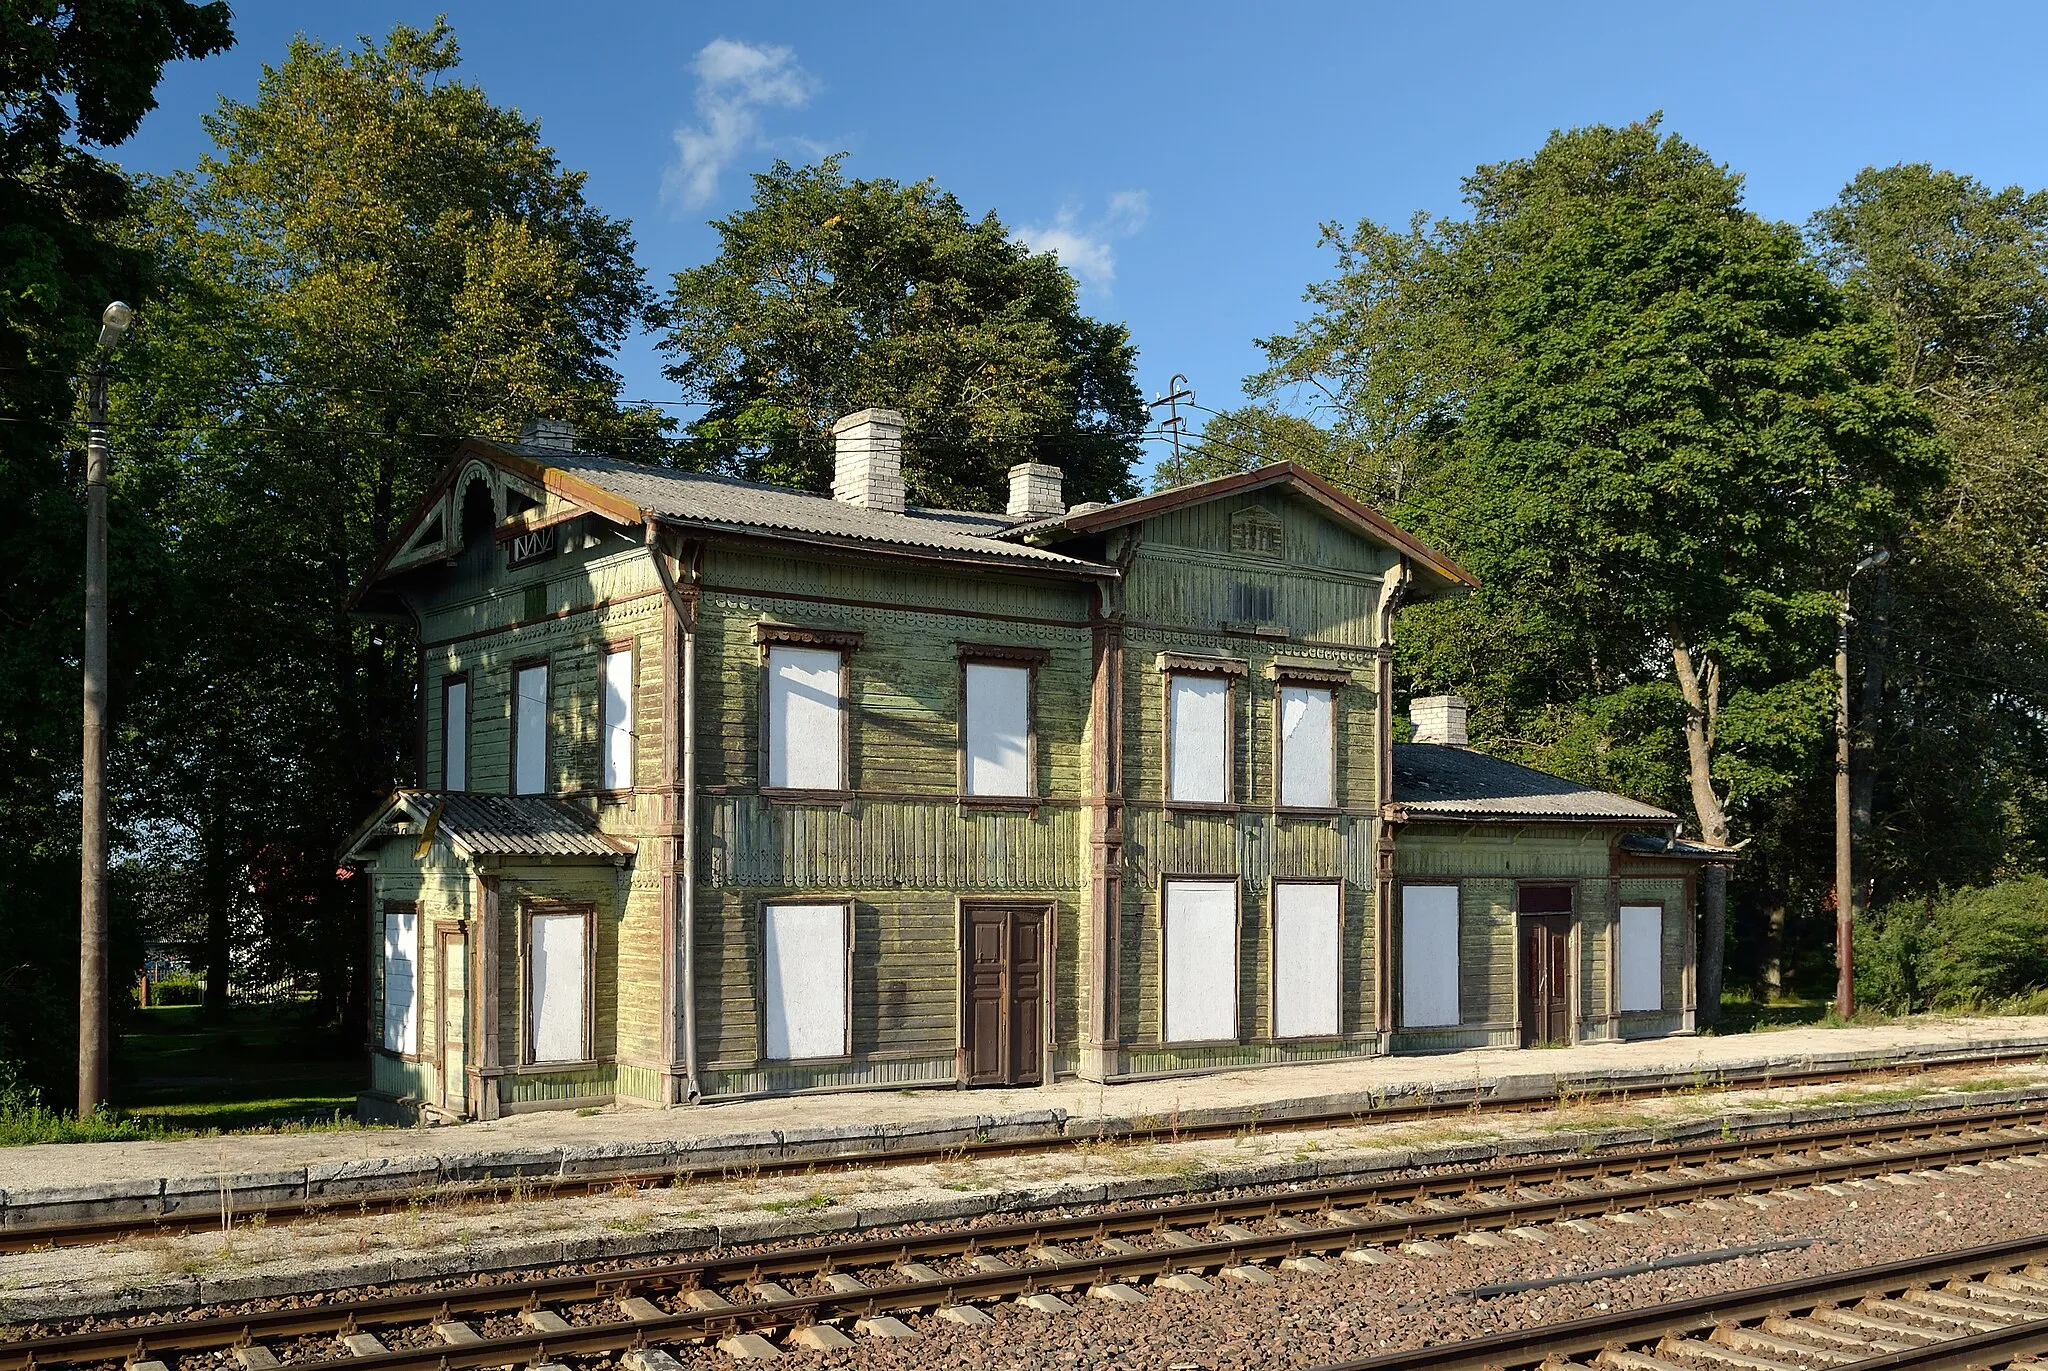 Photo showing: Kabala station building, built in 1870.